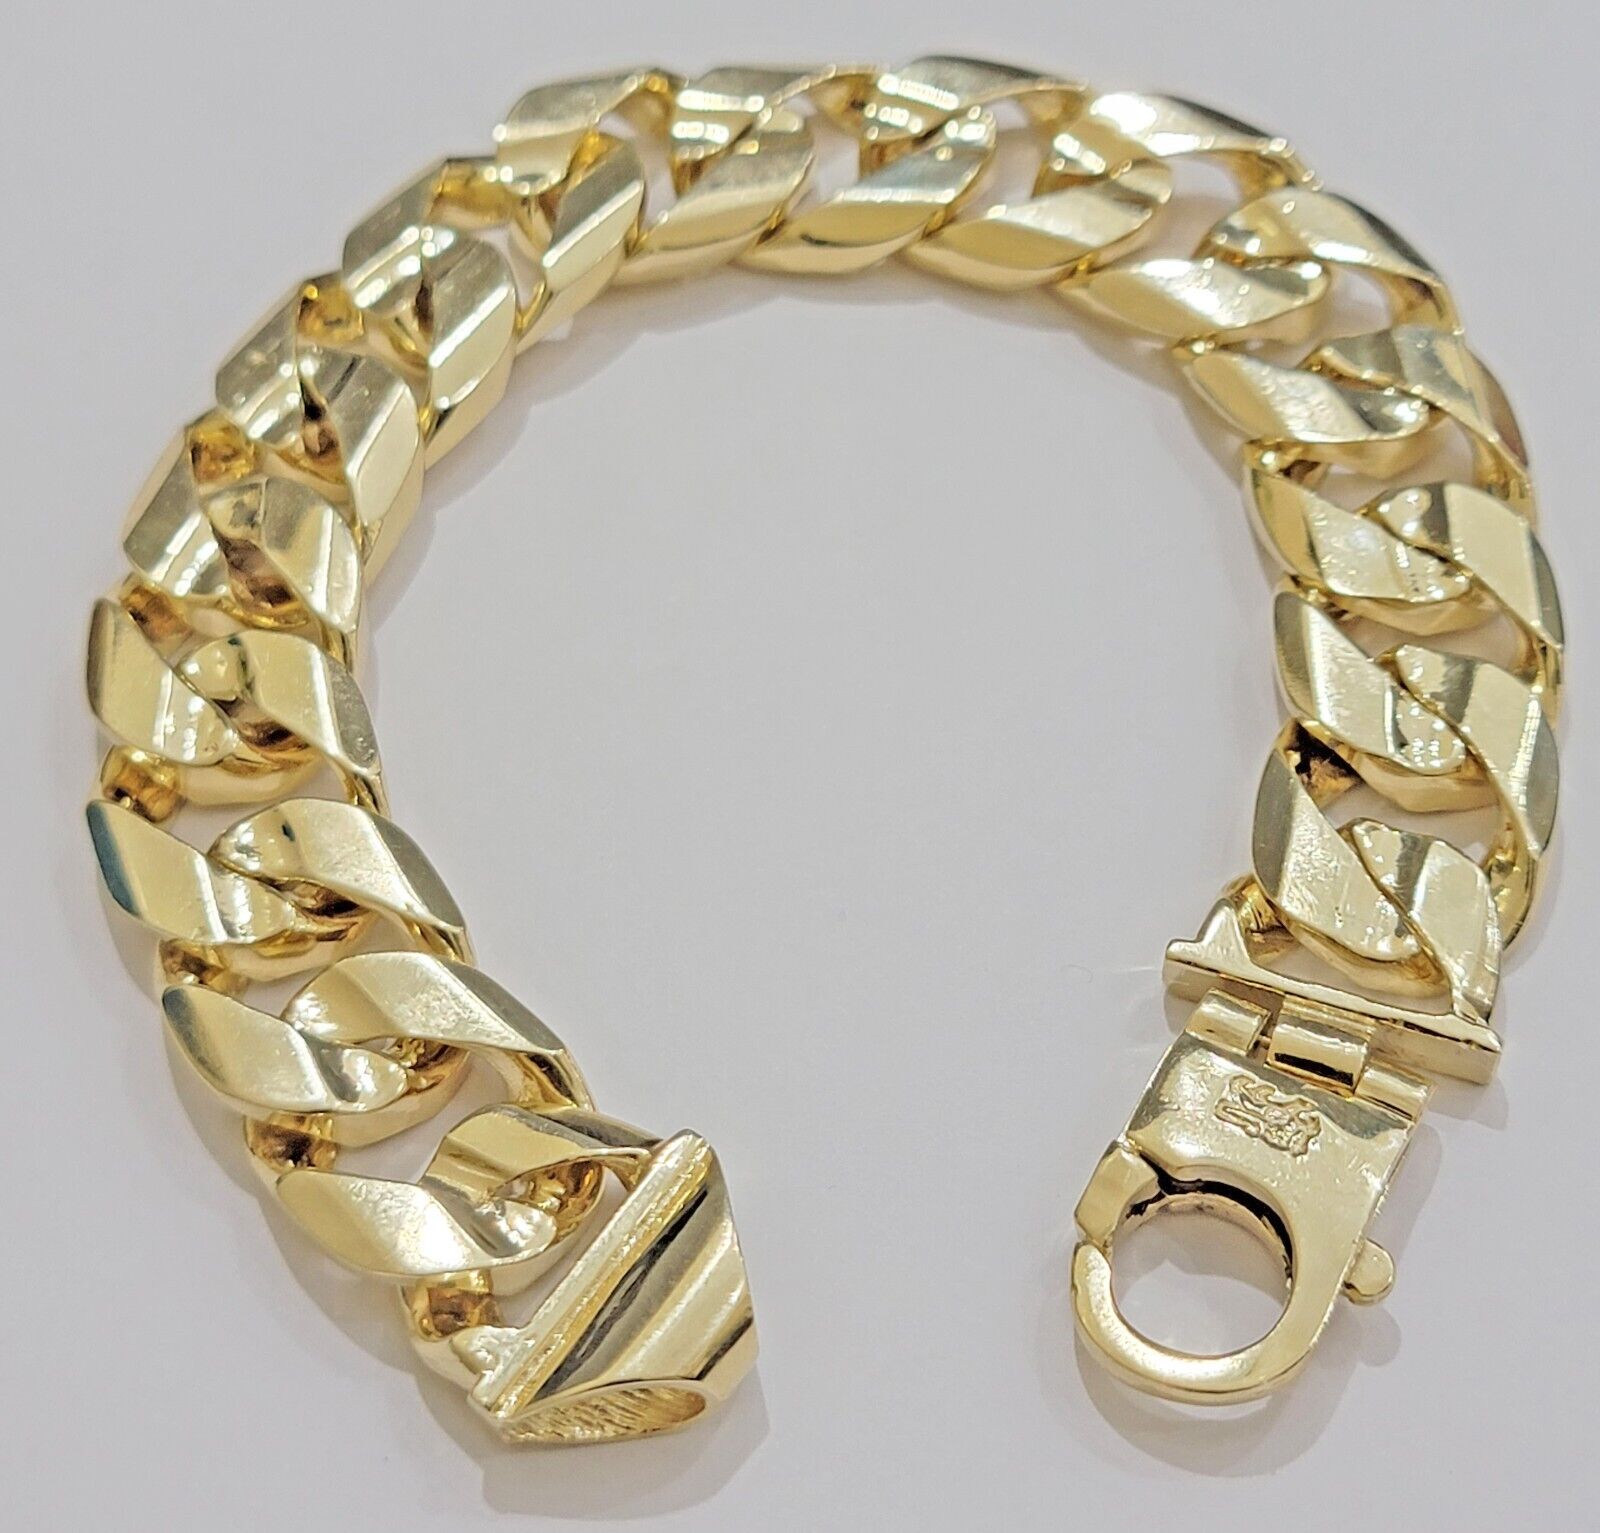 10k Bracelet Miami Cuban Curb Link Mariner Anchor 20mm SOLID 10K Yellow Gold 9